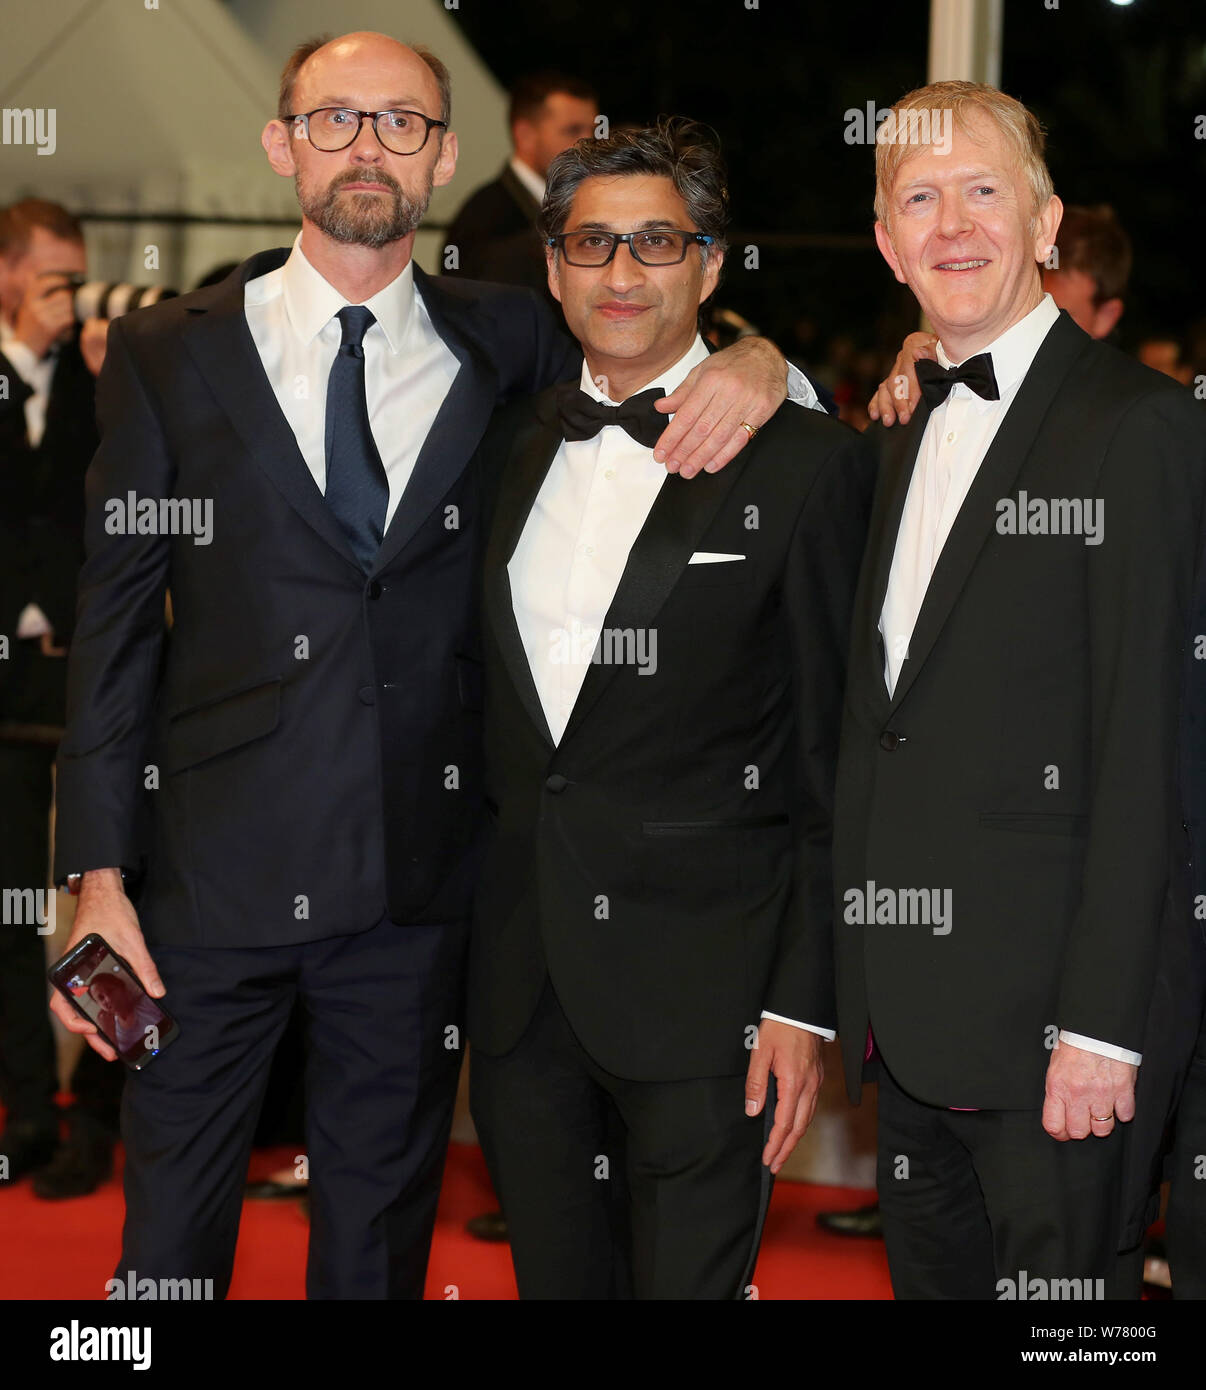 CANNES, FRANCE - MAY 19: James Gay-Rees, Asif Kapadia and Chris King attend the Diego Maradona screening during the 72nd Cannes Film Festival (Mickael Stock Photo